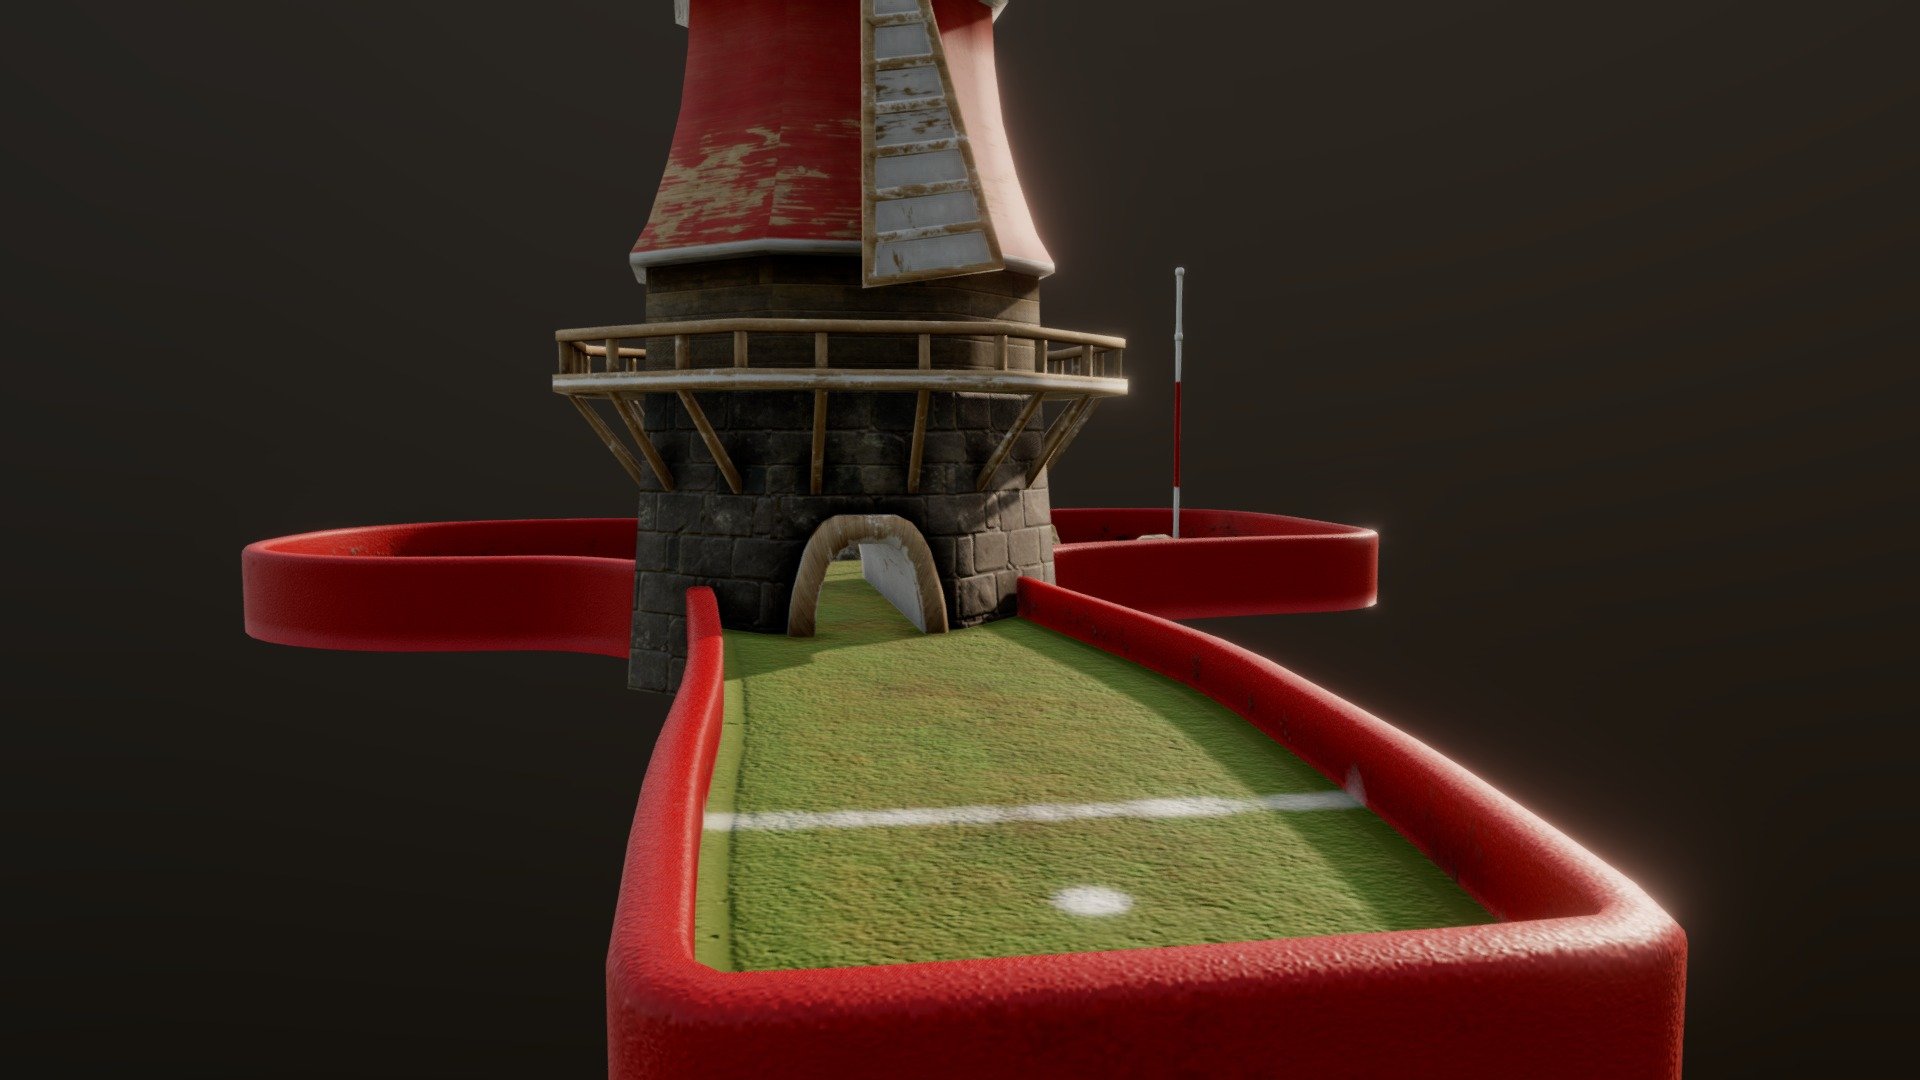 I am working on a new mini golf game. This is my first course. It need more details,but no worries i'm on it 3d model